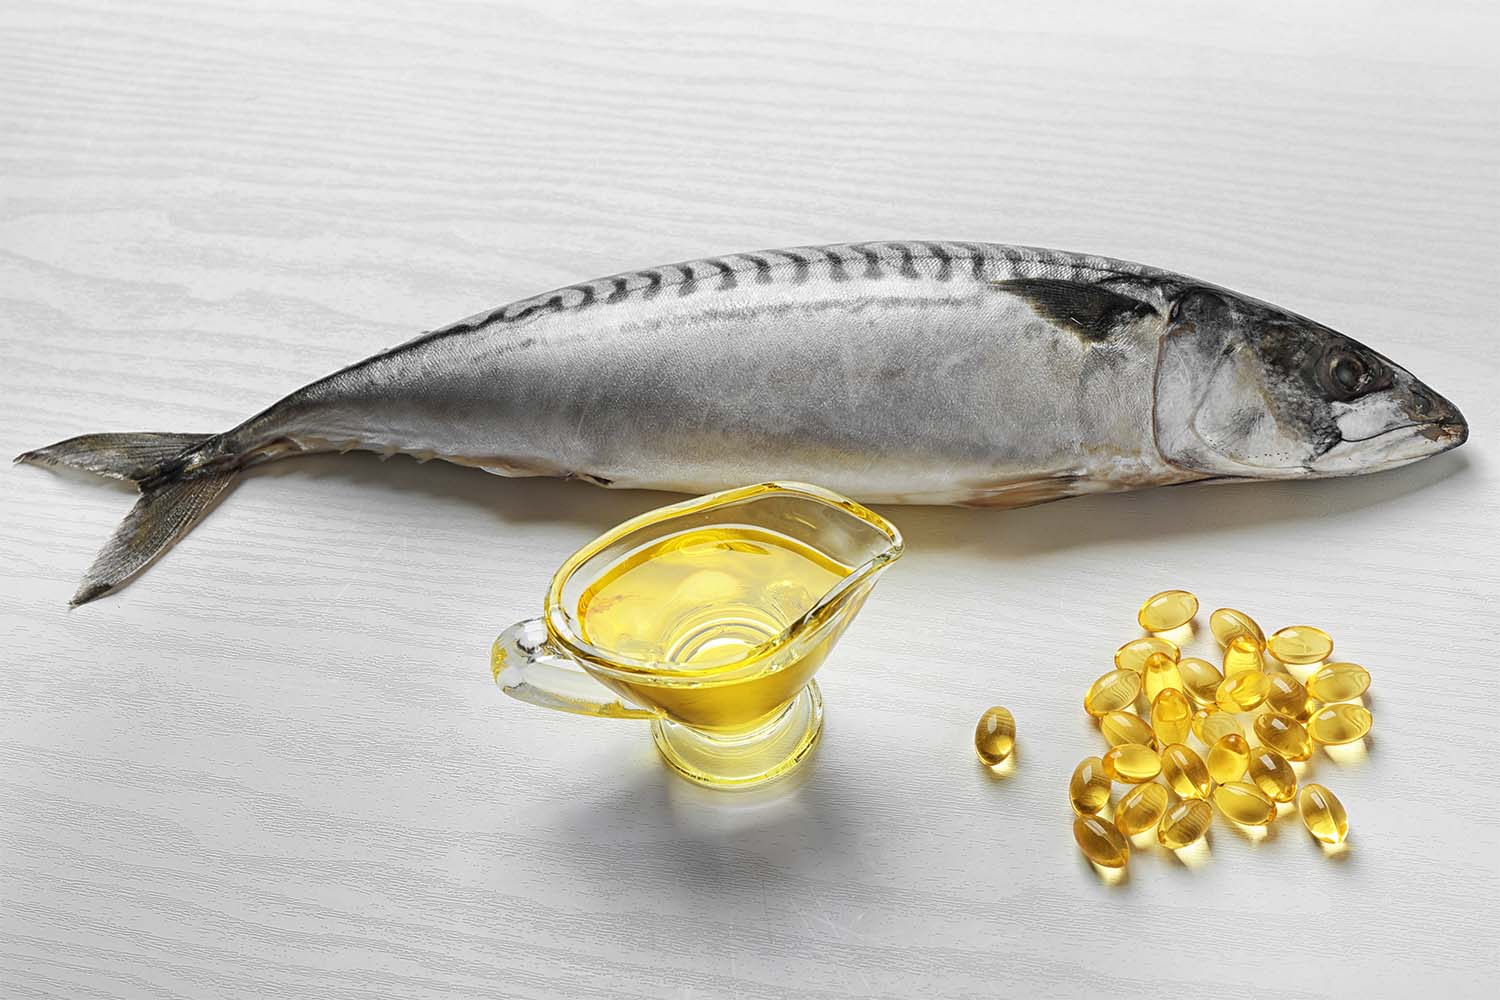 Algae Oil vs Fish Oil: Which One Is Right for You?